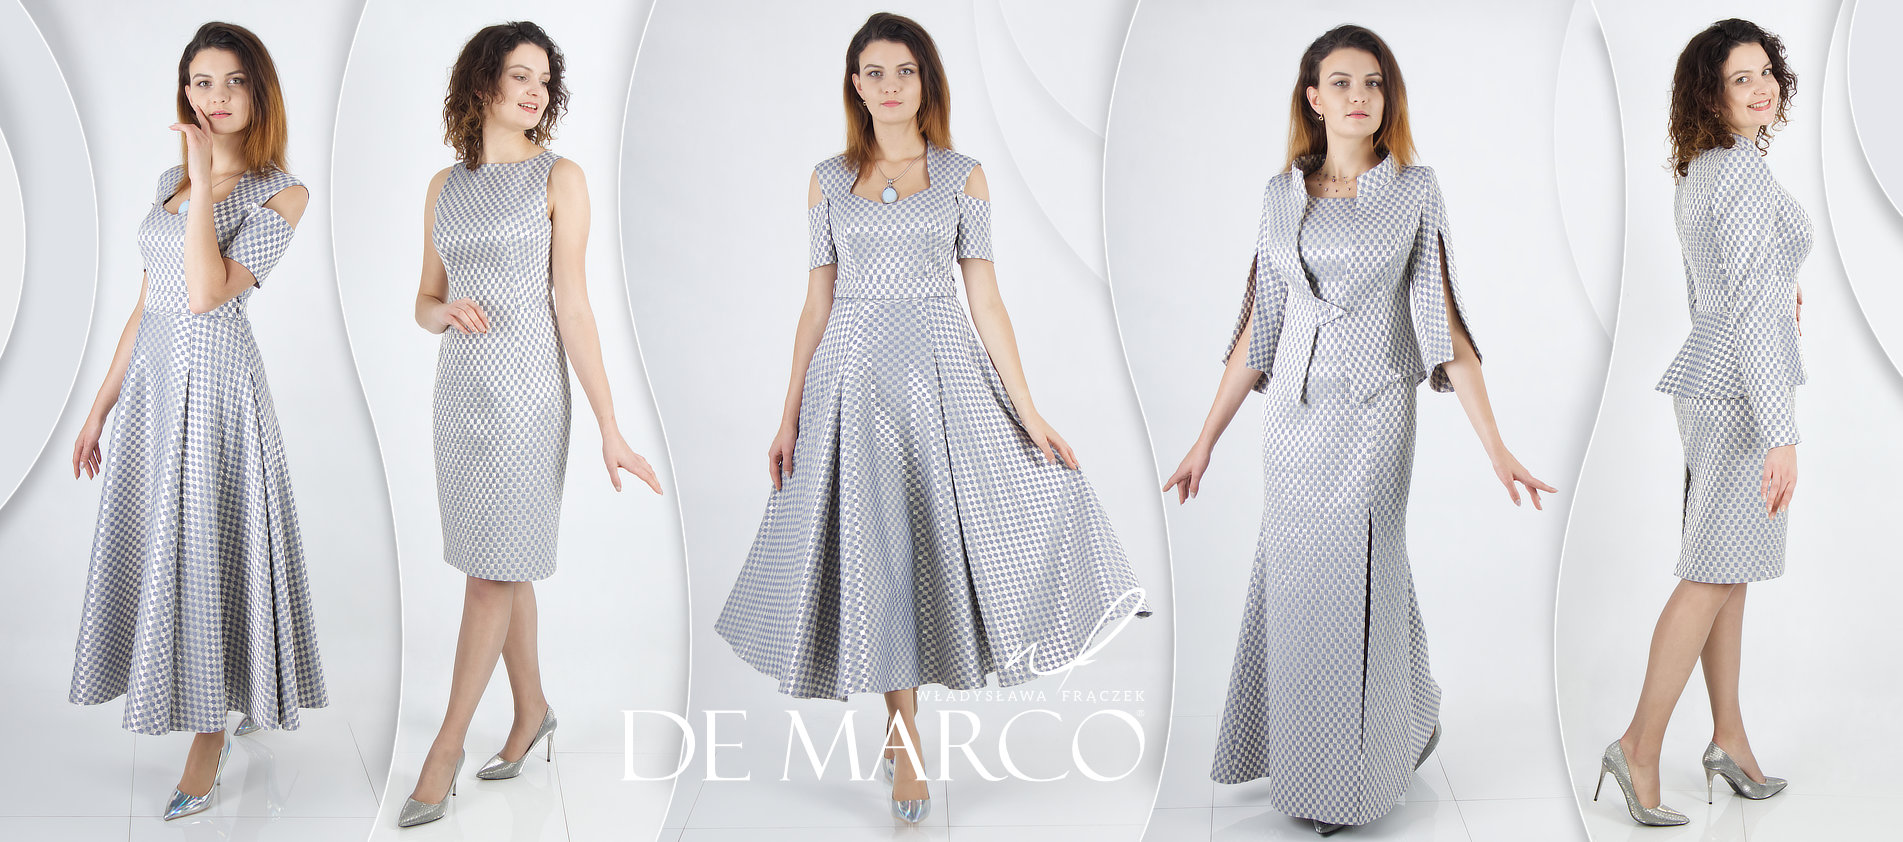 Son’s wedding, daughter’s wedding fashionable wedding dresses for mum. De Marco Exclusive dress for wedding in November